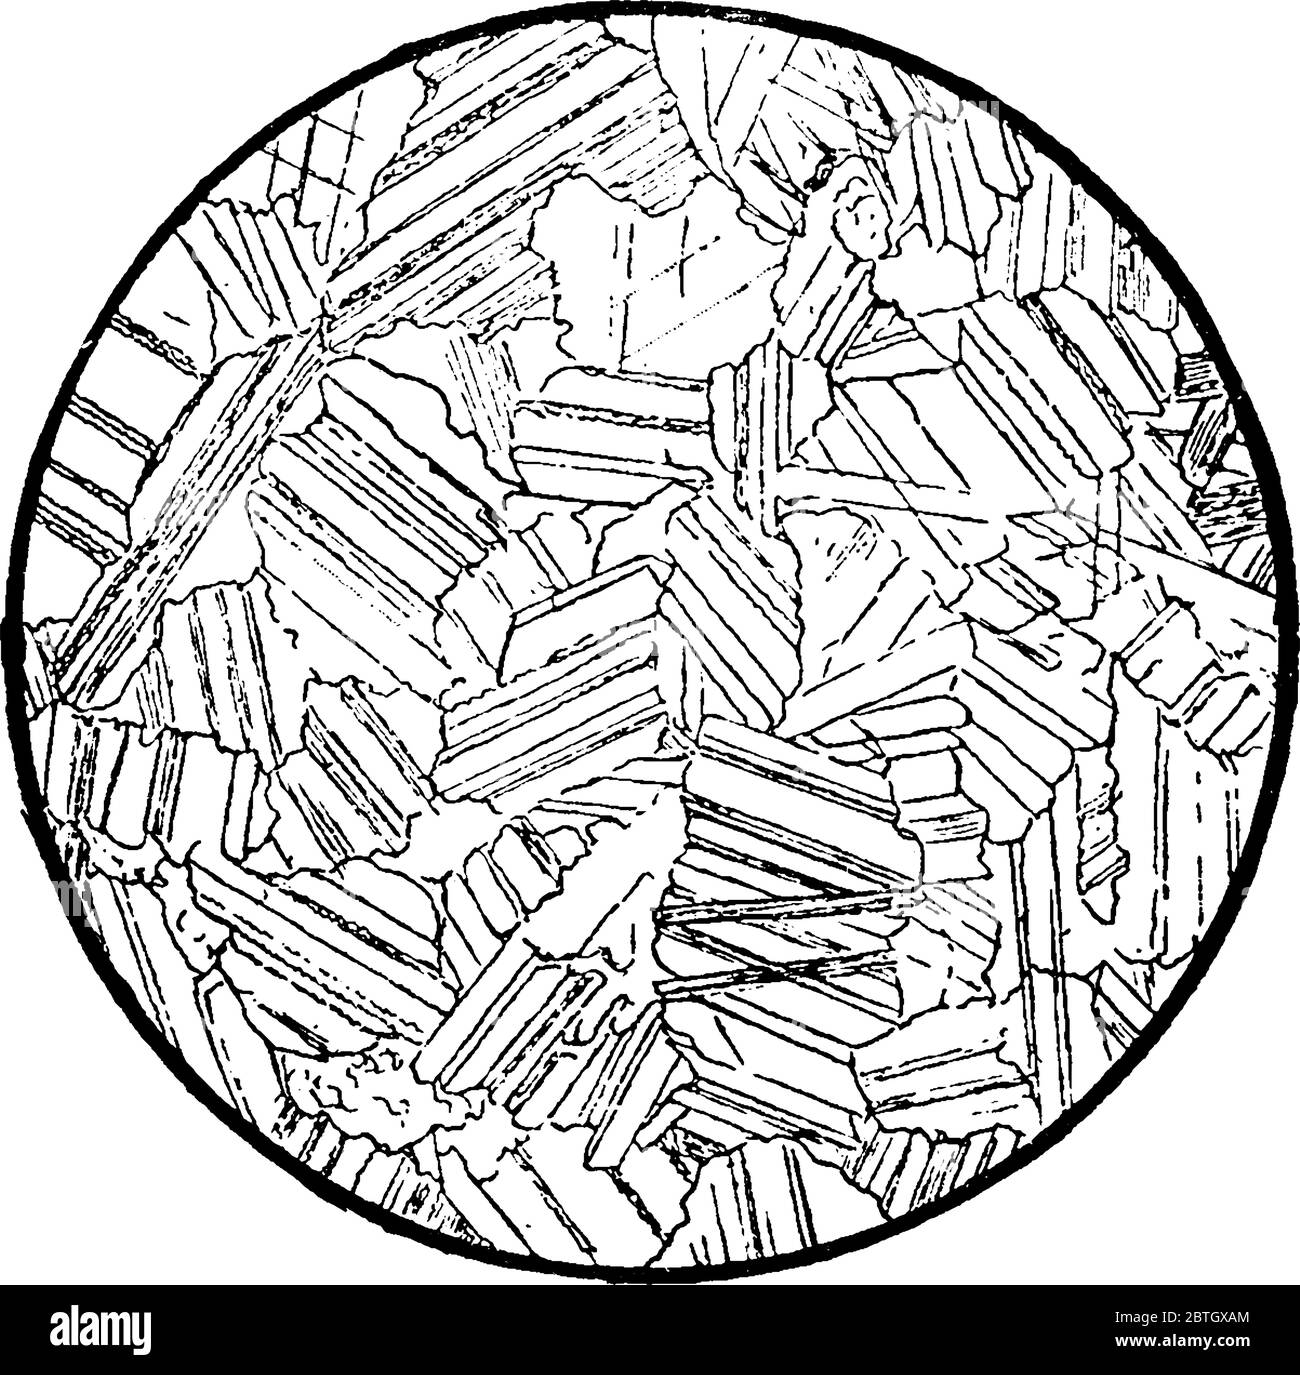 The microscopic view of crystalline limestone, limestone is a hard sedimentary rock, composed mainly of calcium carbonate, vintage line drawing or eng Stock Vector